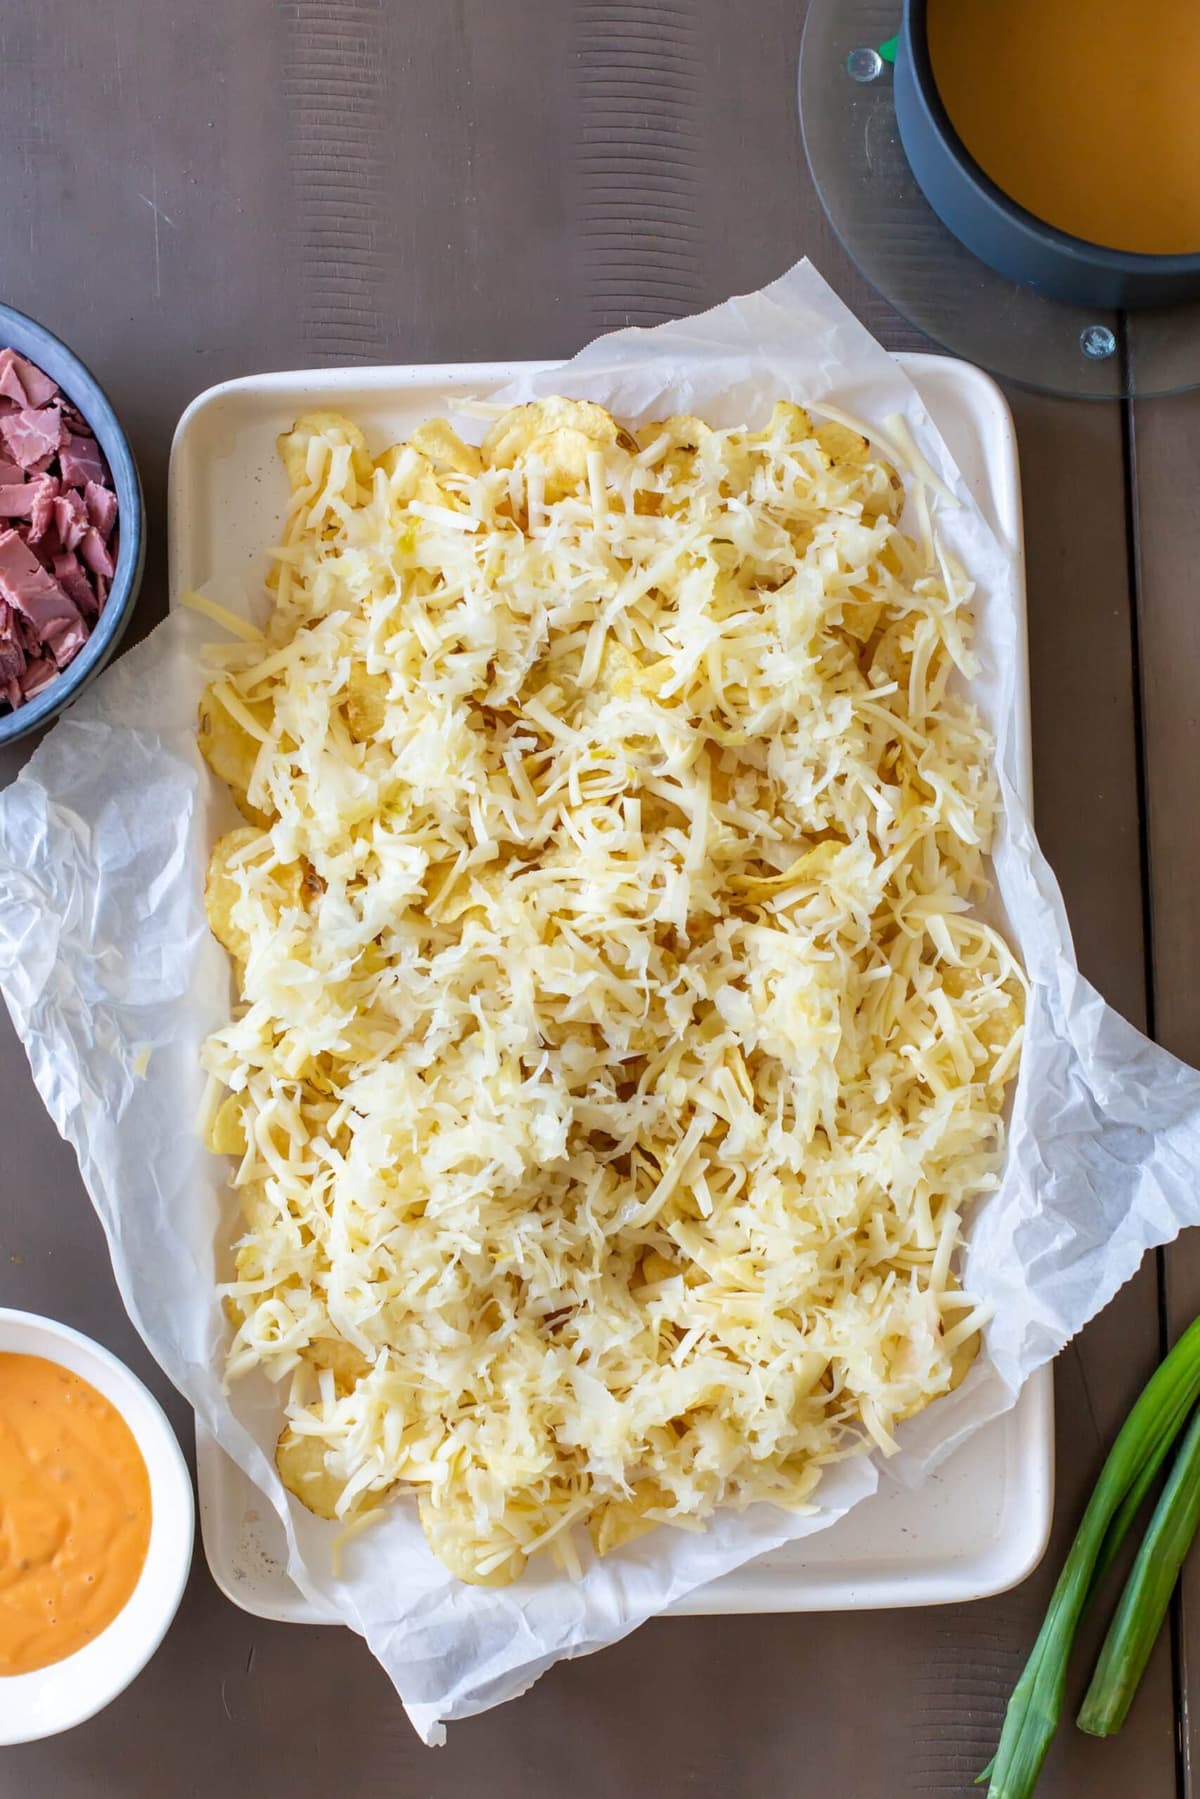 A plate of potato chips is topped with sauerkraut on top of the Swiss cheese.